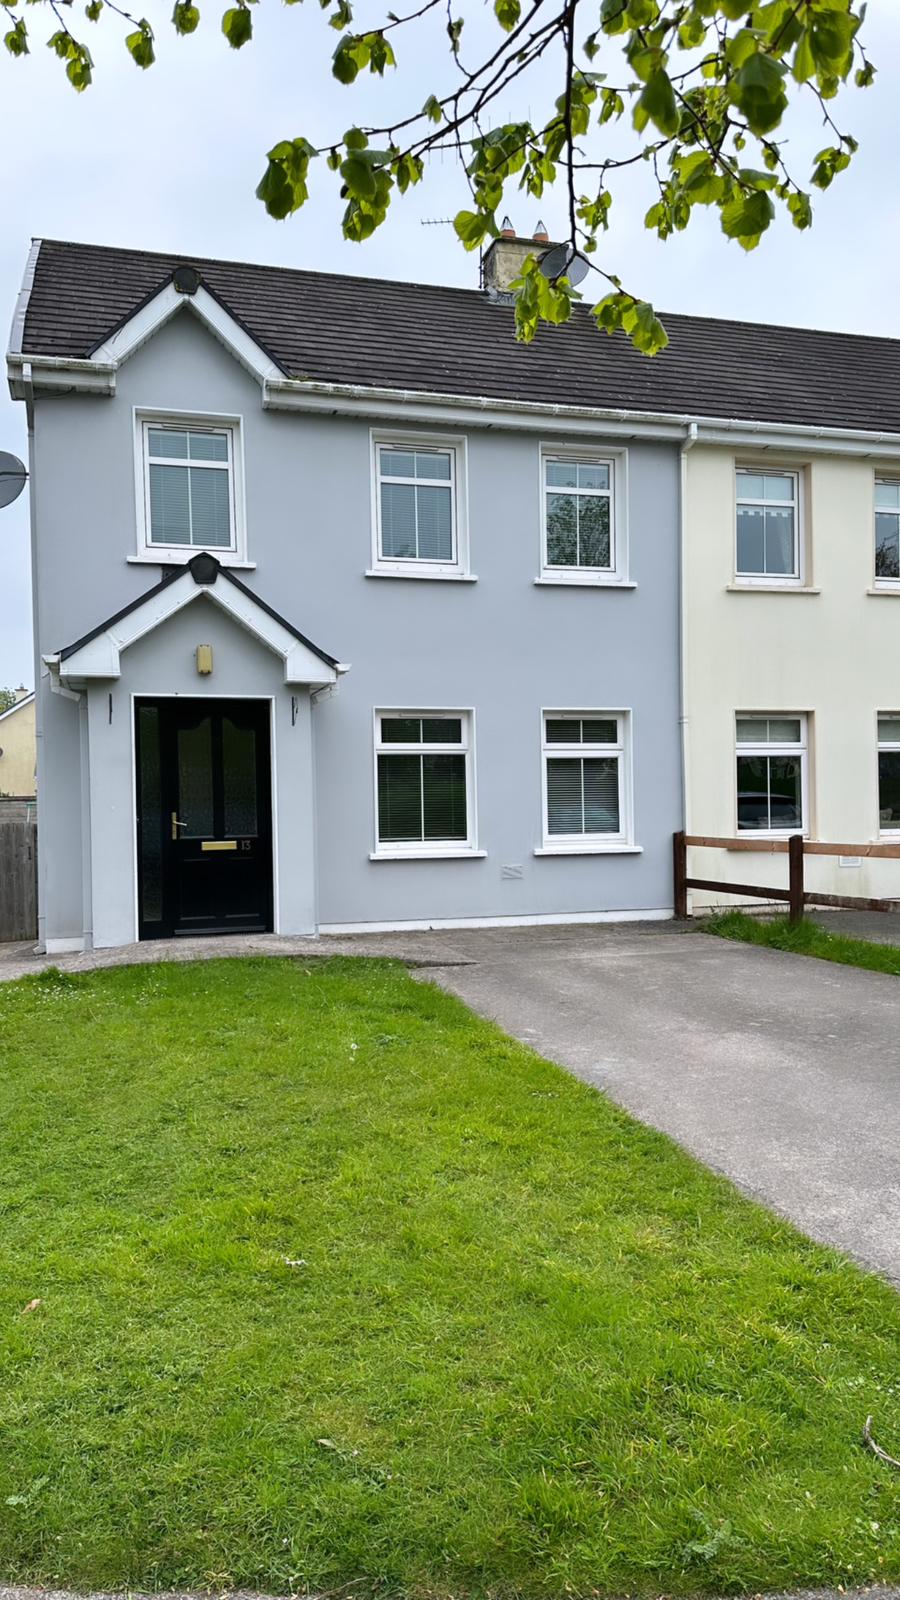 3 Bedroom Family Home | 13 Berry Hill, Castlelyons P61 N273